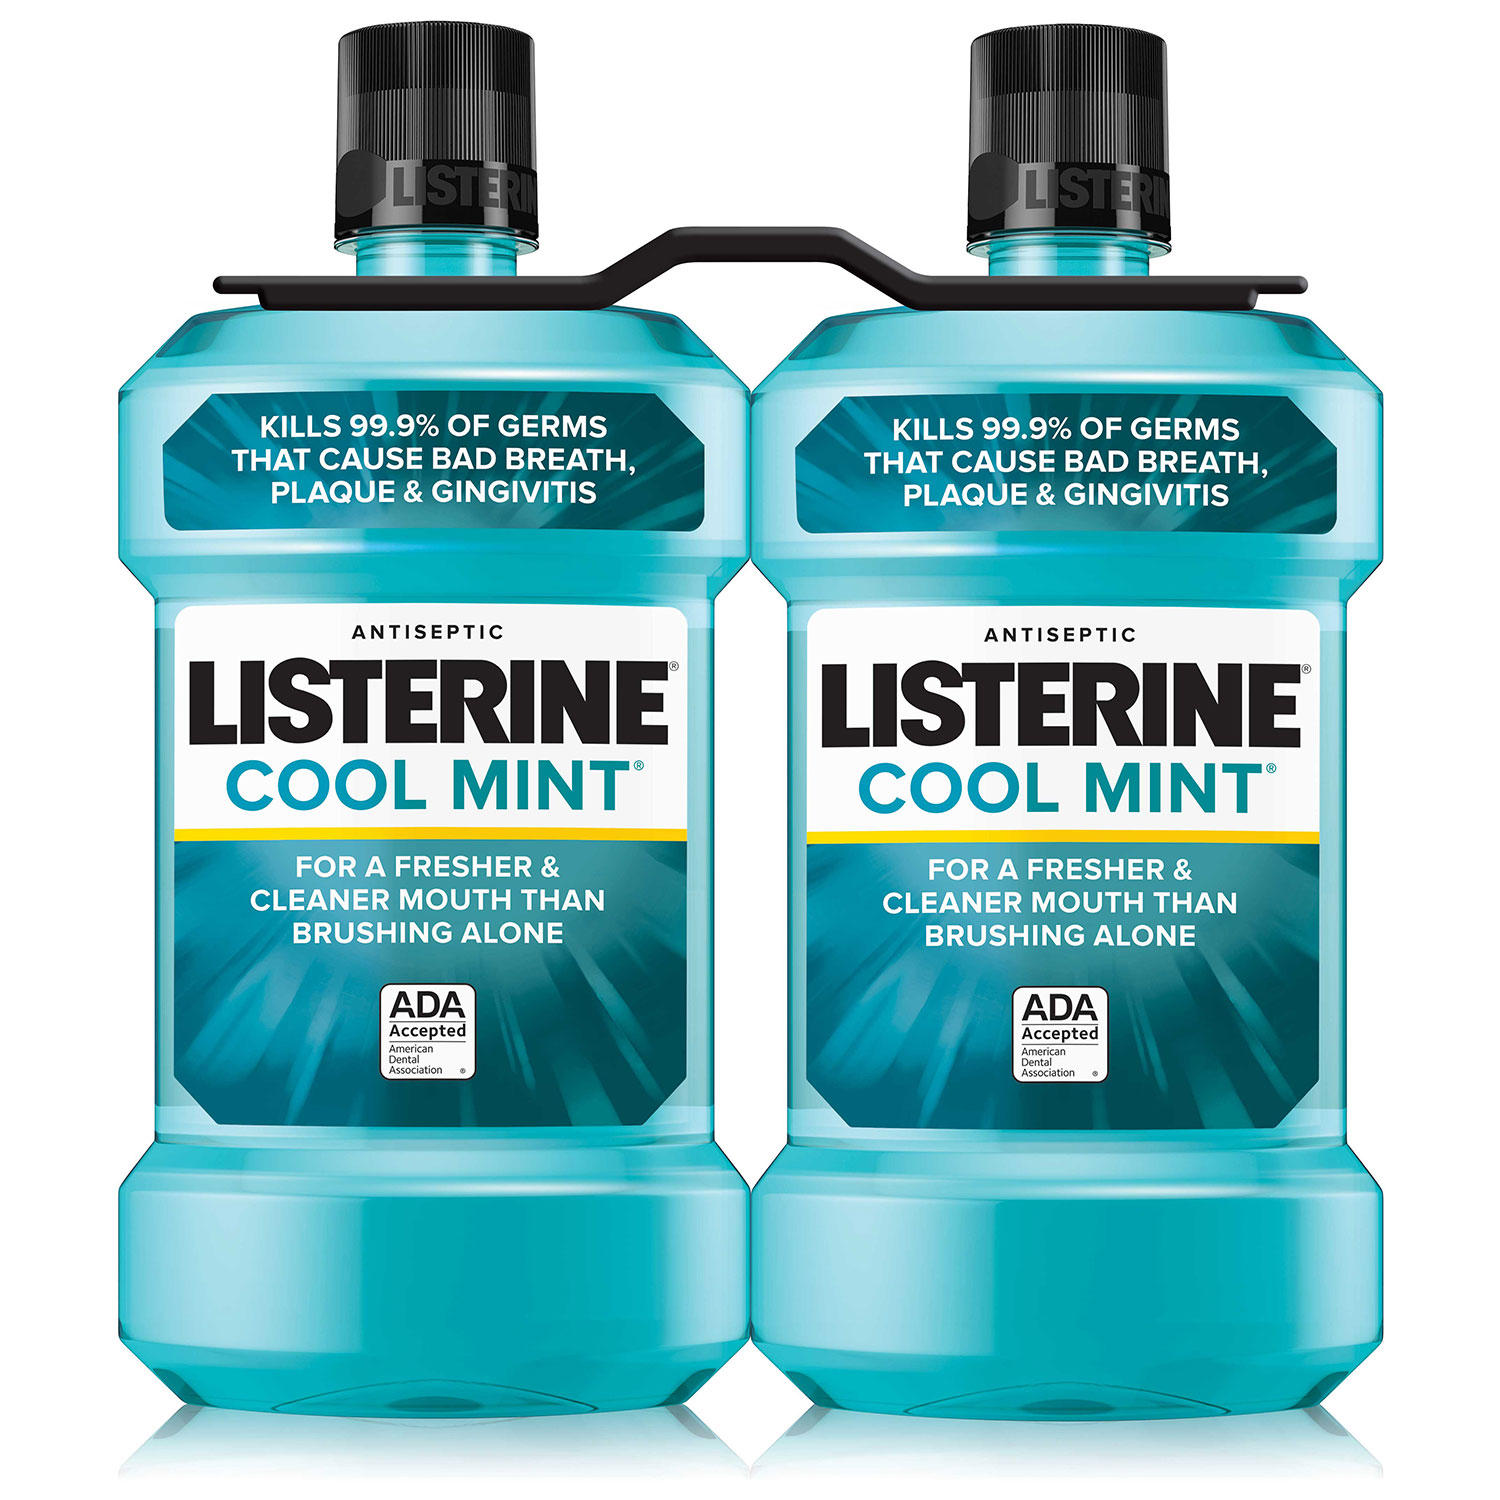 Sam's Club: 2-Pack 1.5-L Listerine Antiseptic Mouthwash (Cool Mint or Original) $11.88 + Free Shipping for Plus Members